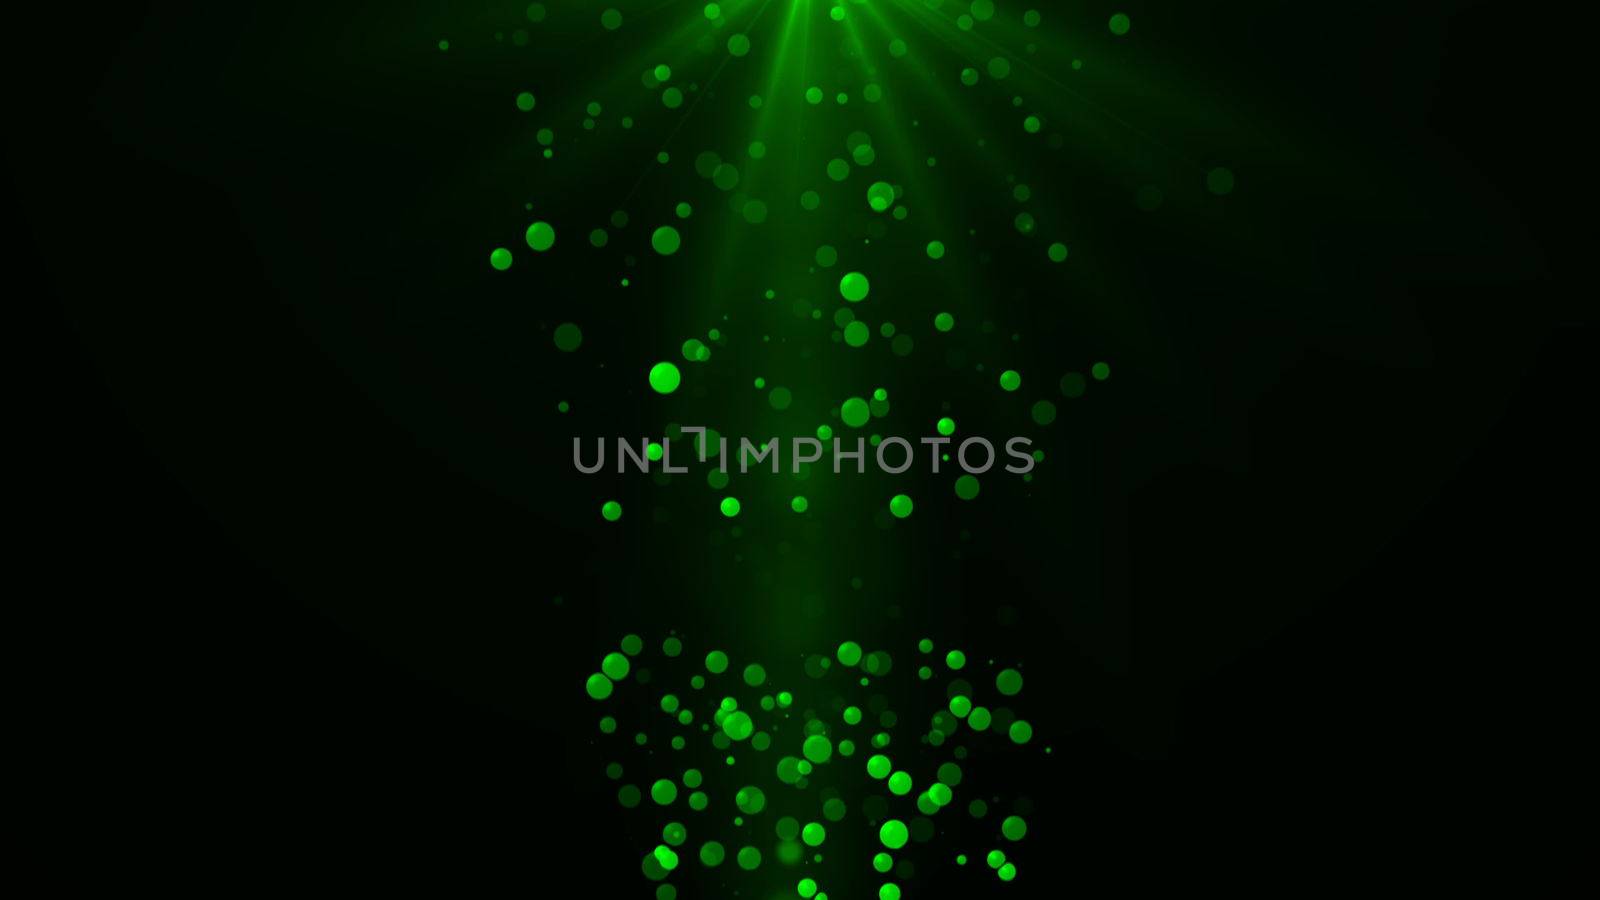 Abstract background with flickering Underwater bubbles. 3d rendering